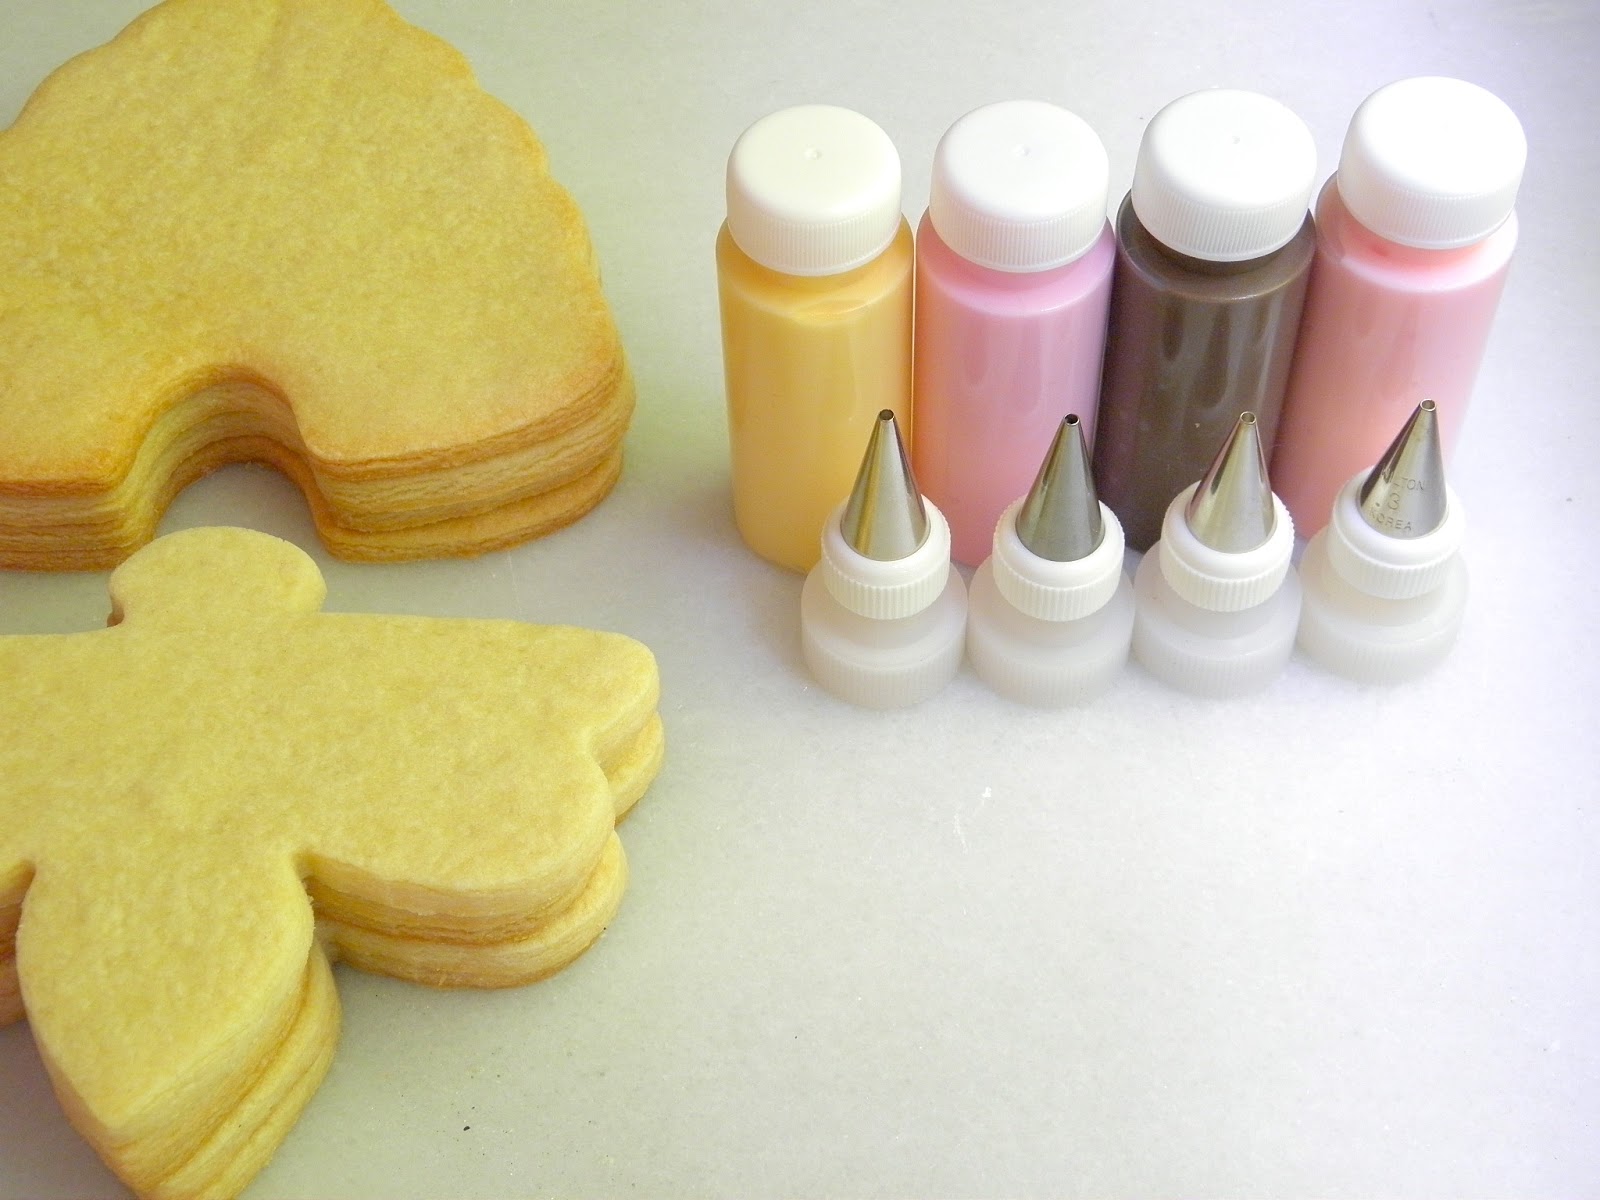 Icing Kit - 3 Bottles for Decorating Cookies